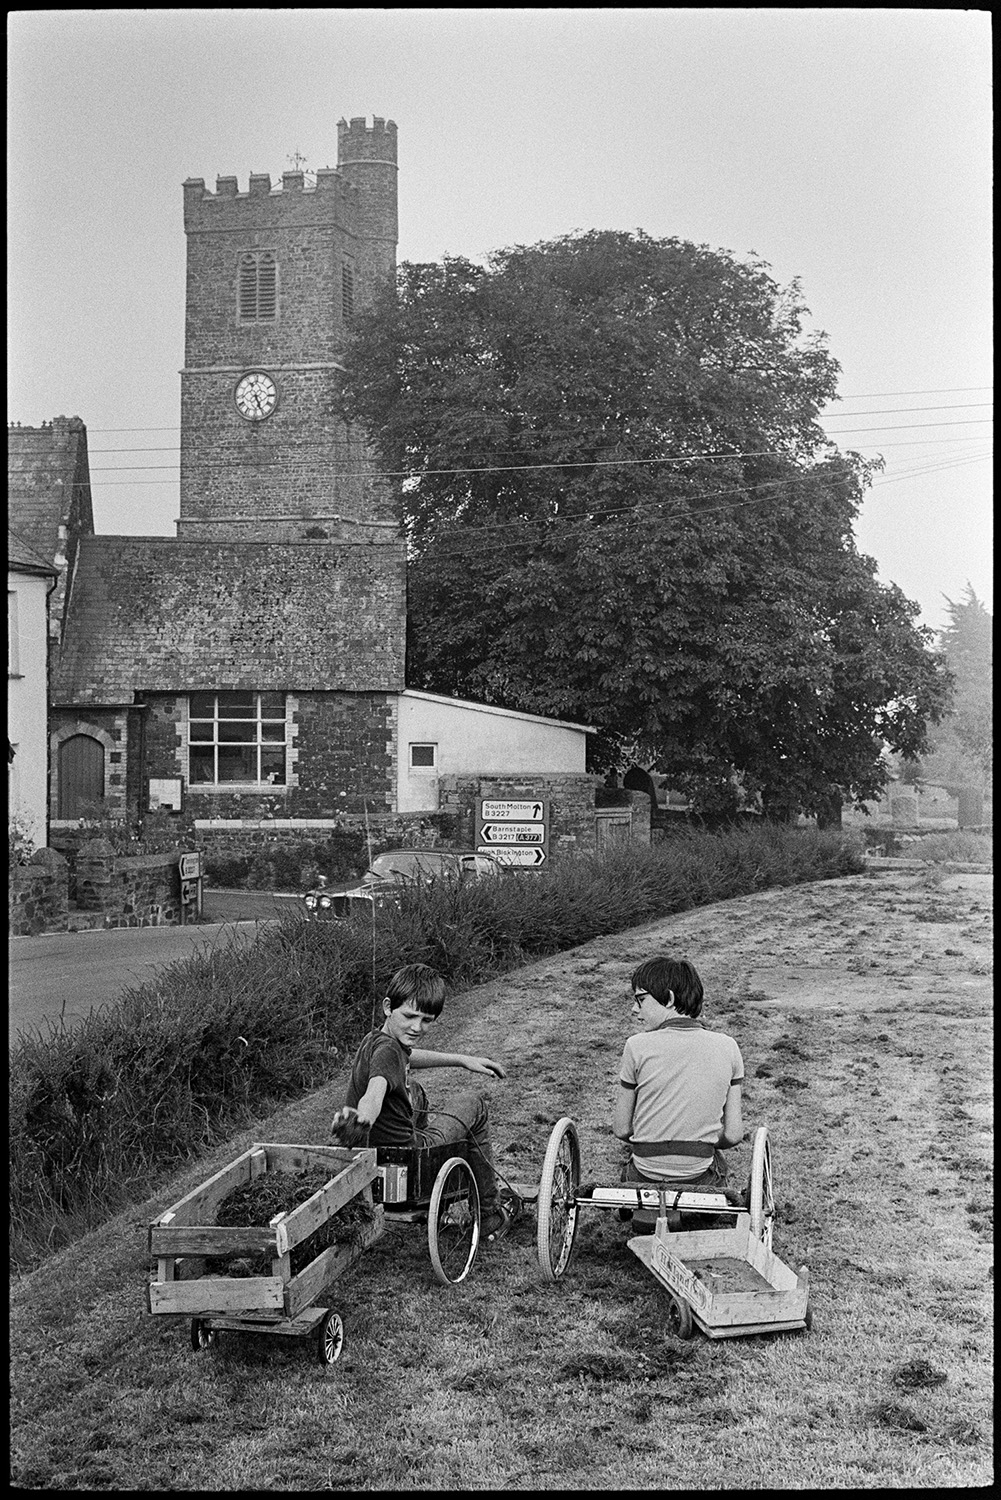 Children playing with buggy and trying to knock down conkers from chestnut tree, church.
[Two boys sitting on home made go-karts in a small field of newly cut grass by the road opposite the church in Atherington. One boy is collecting the grass cuttings in his trailer.]